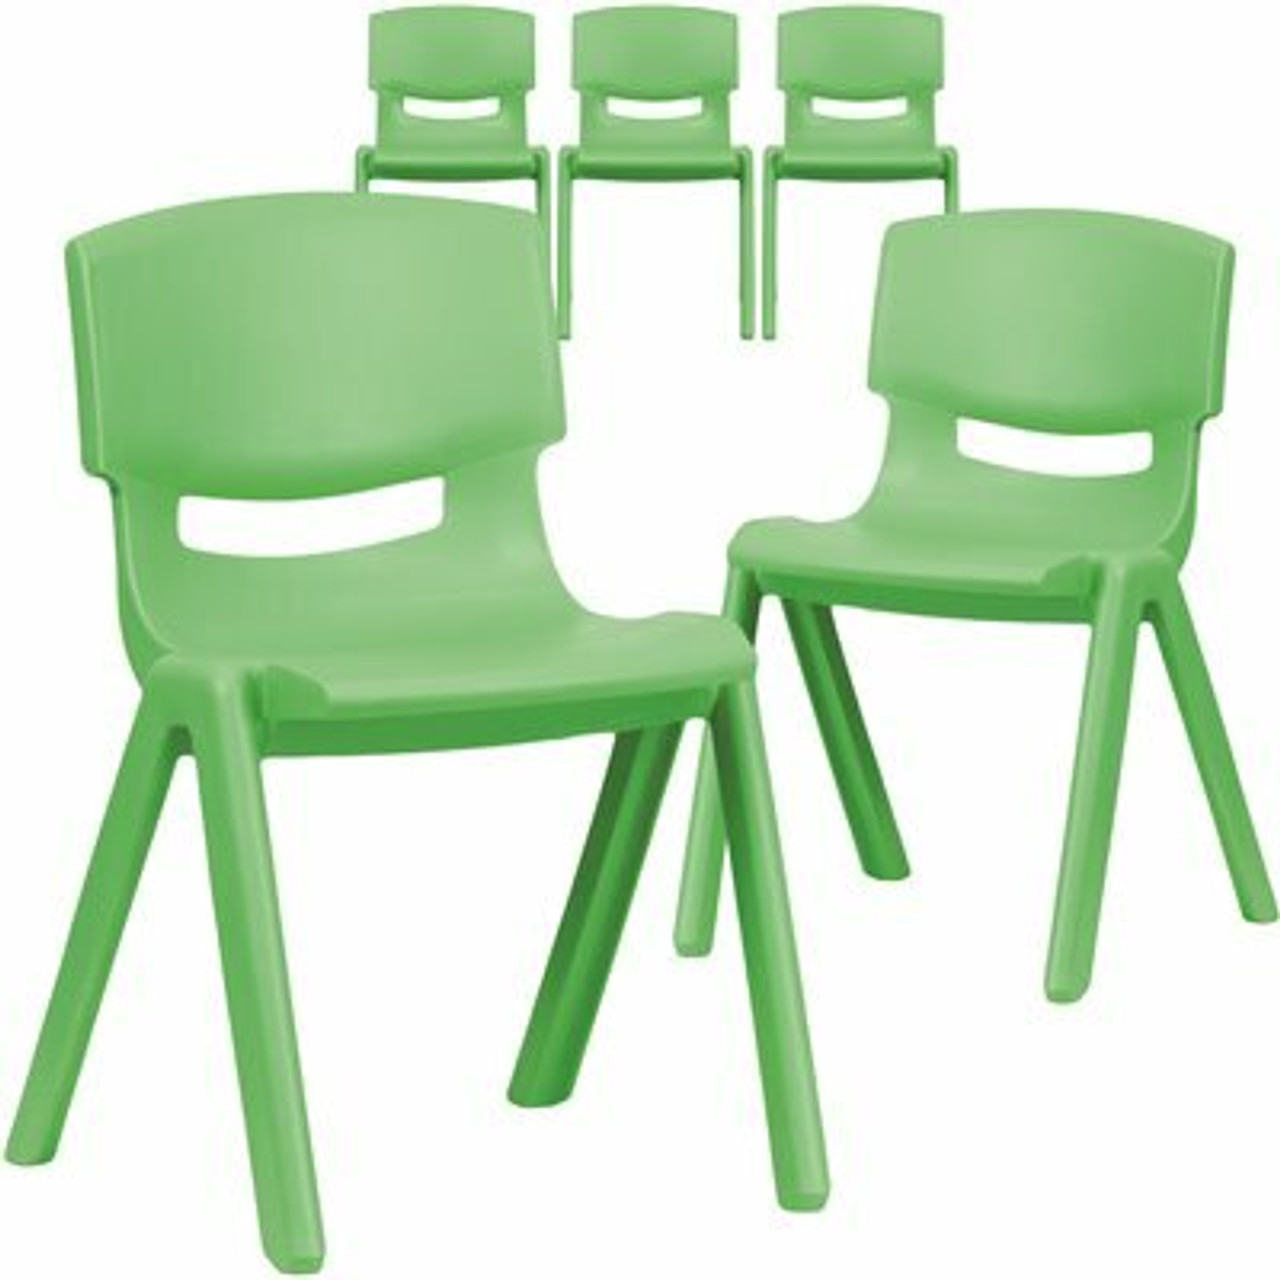 Carnegy Avenue Green Plastic Stack Chairs (Set Of 5) - 311268419